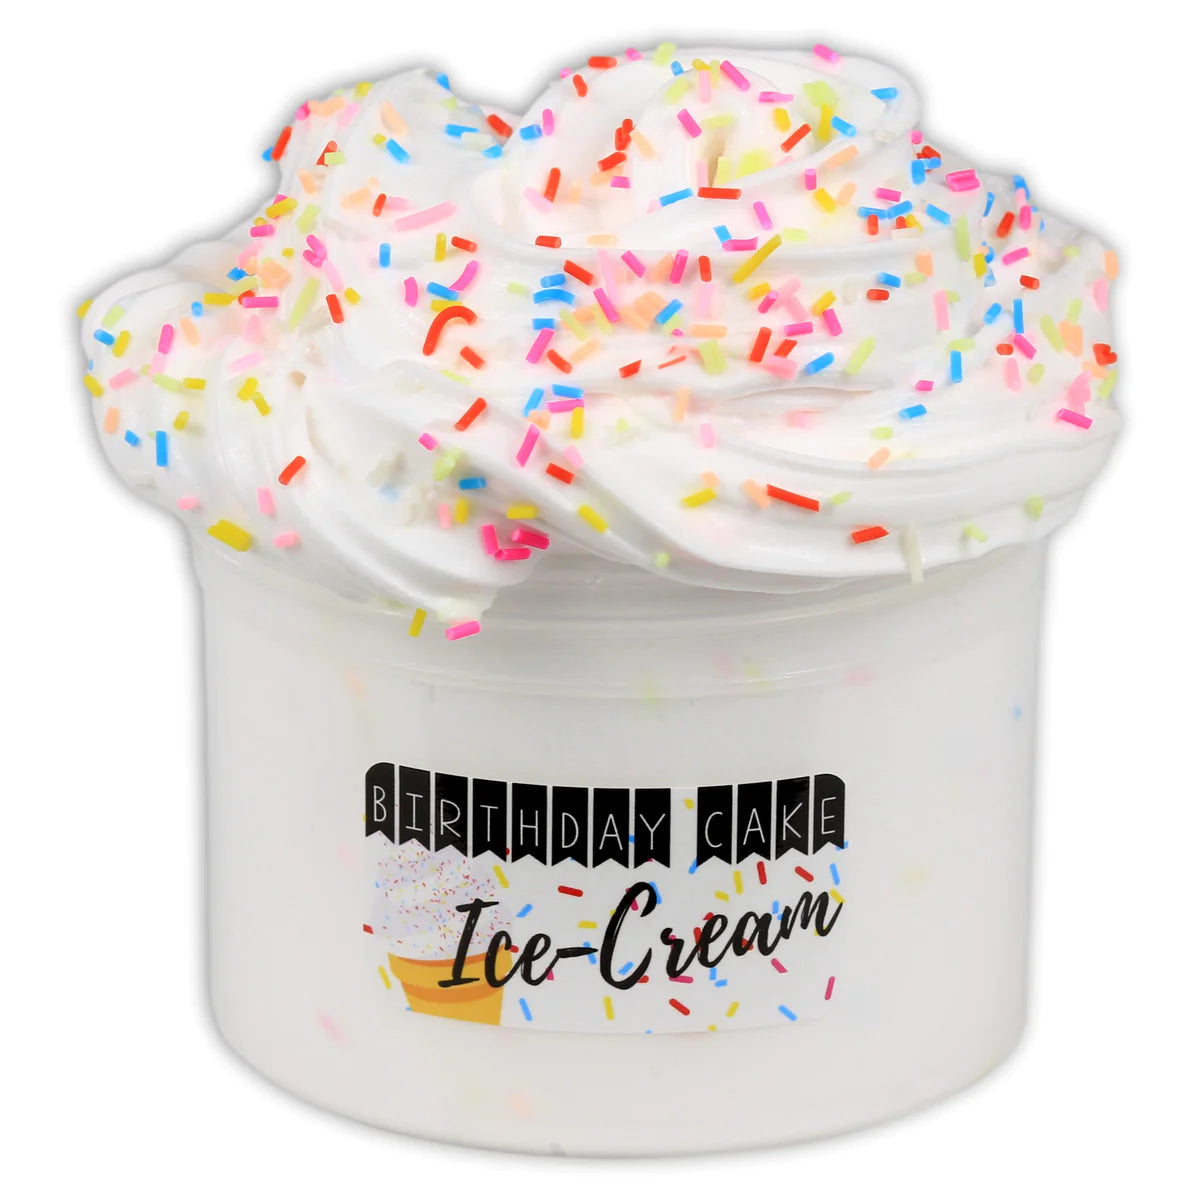 Birthday Cake Ice Cream Slime by Dope Slimes #WS2BS1118